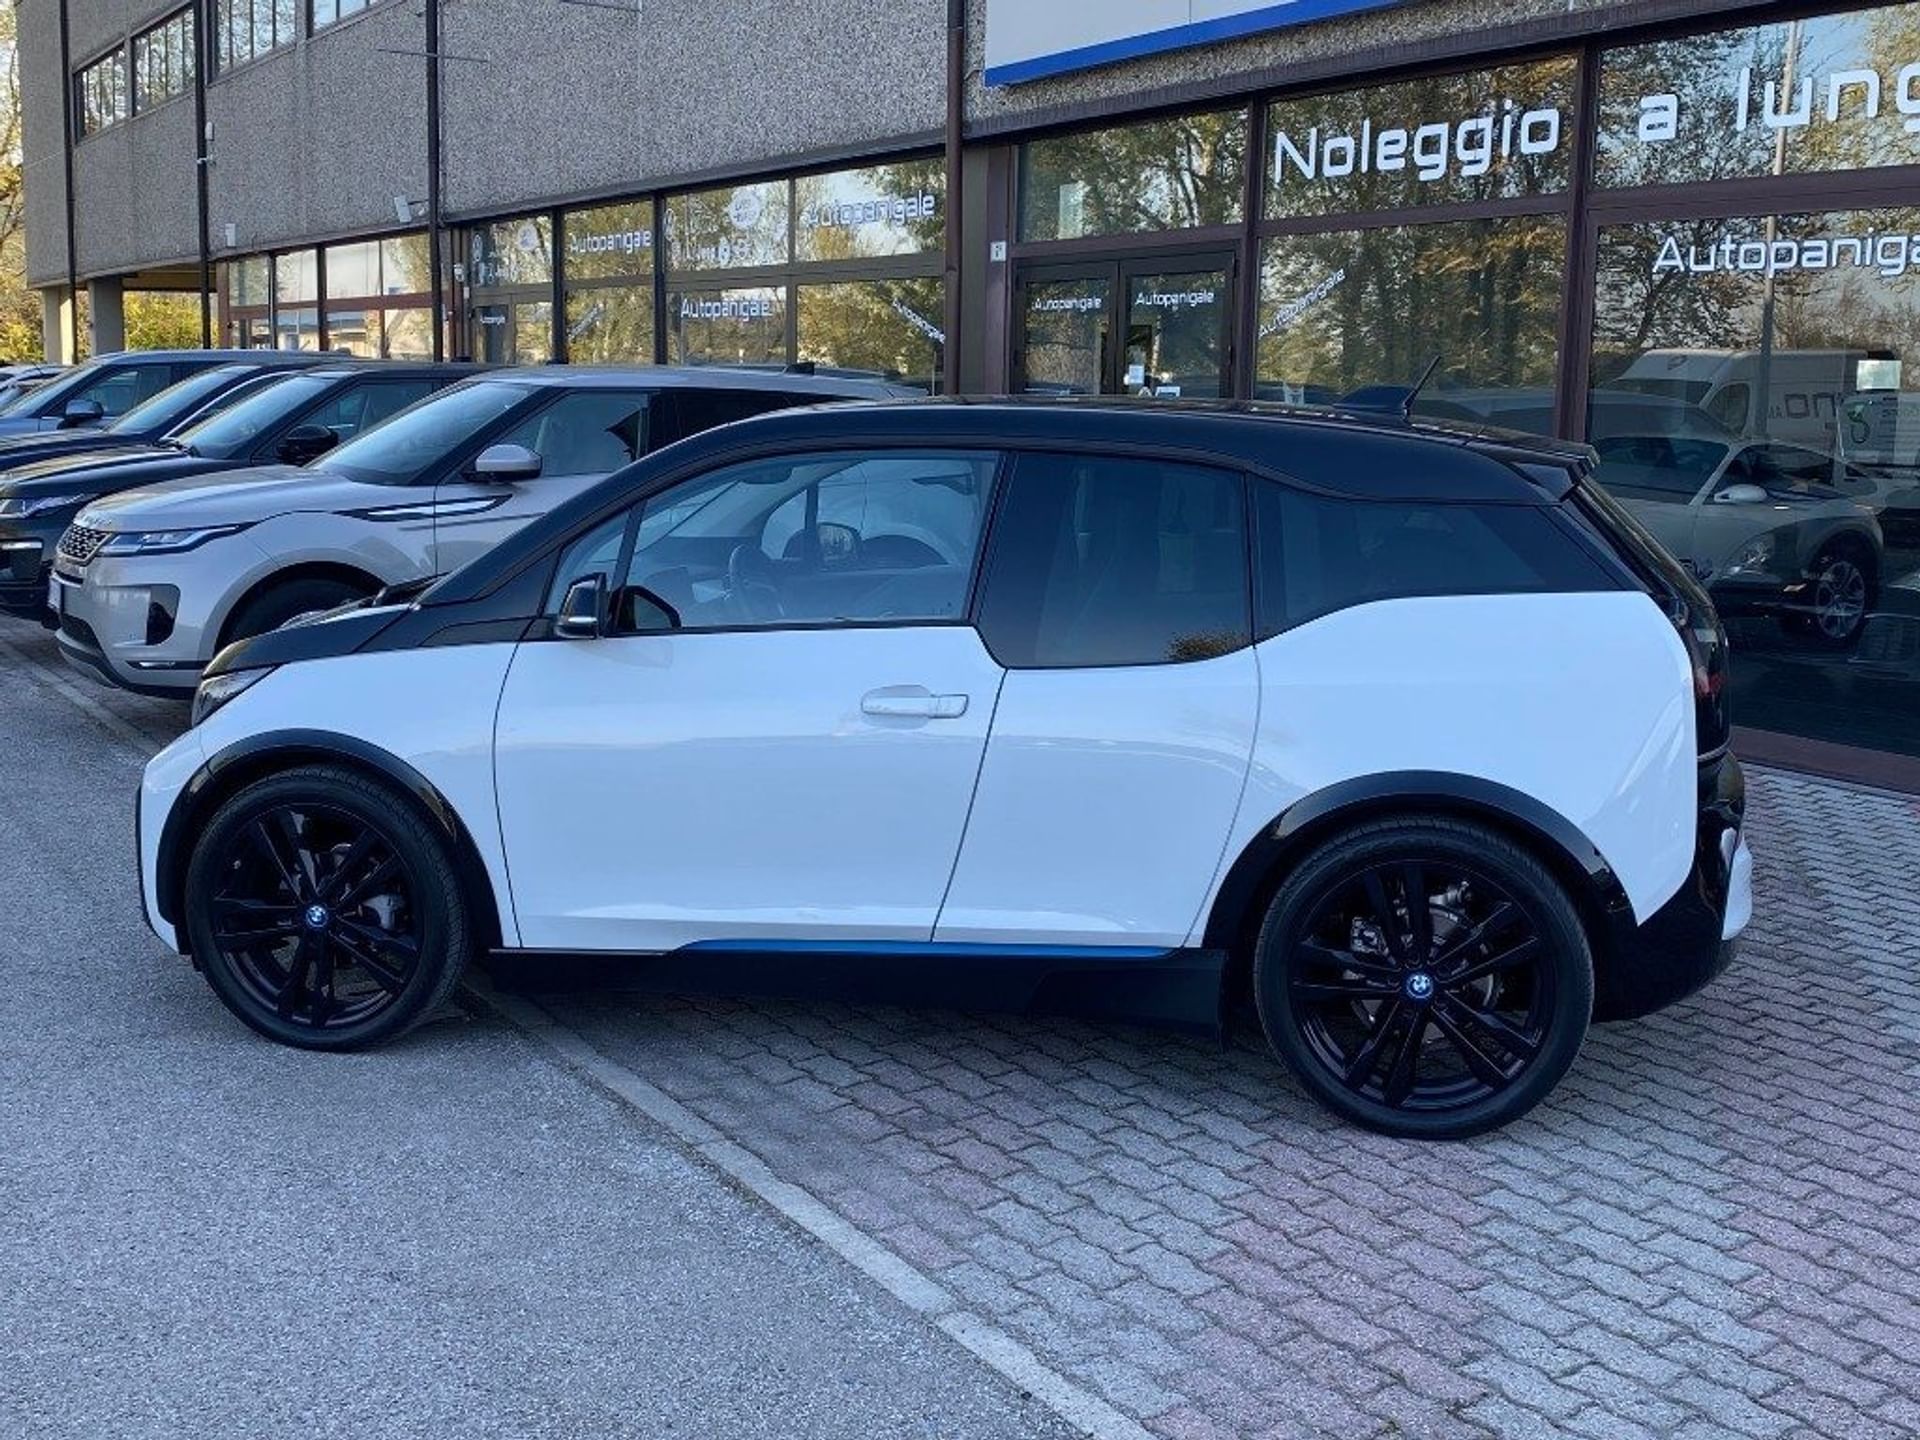 Bmw i3s - Laterale sinistro